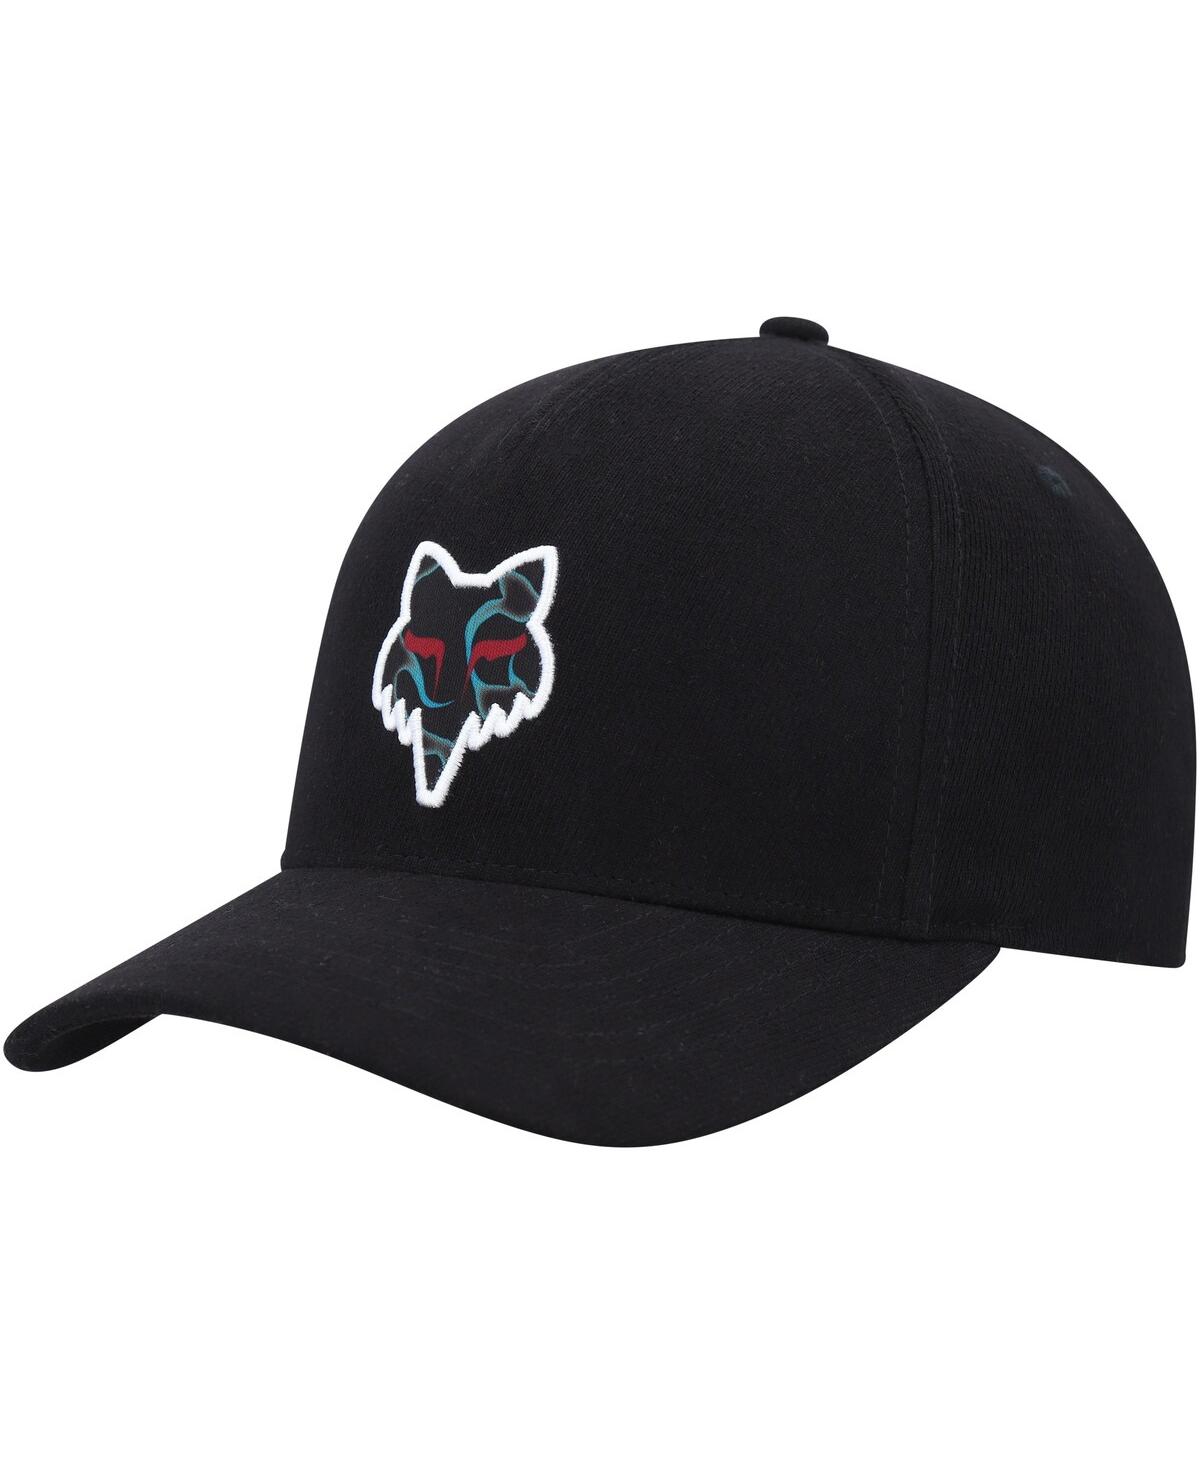 Women's Fox Black Withered Adjustable Hat - Black